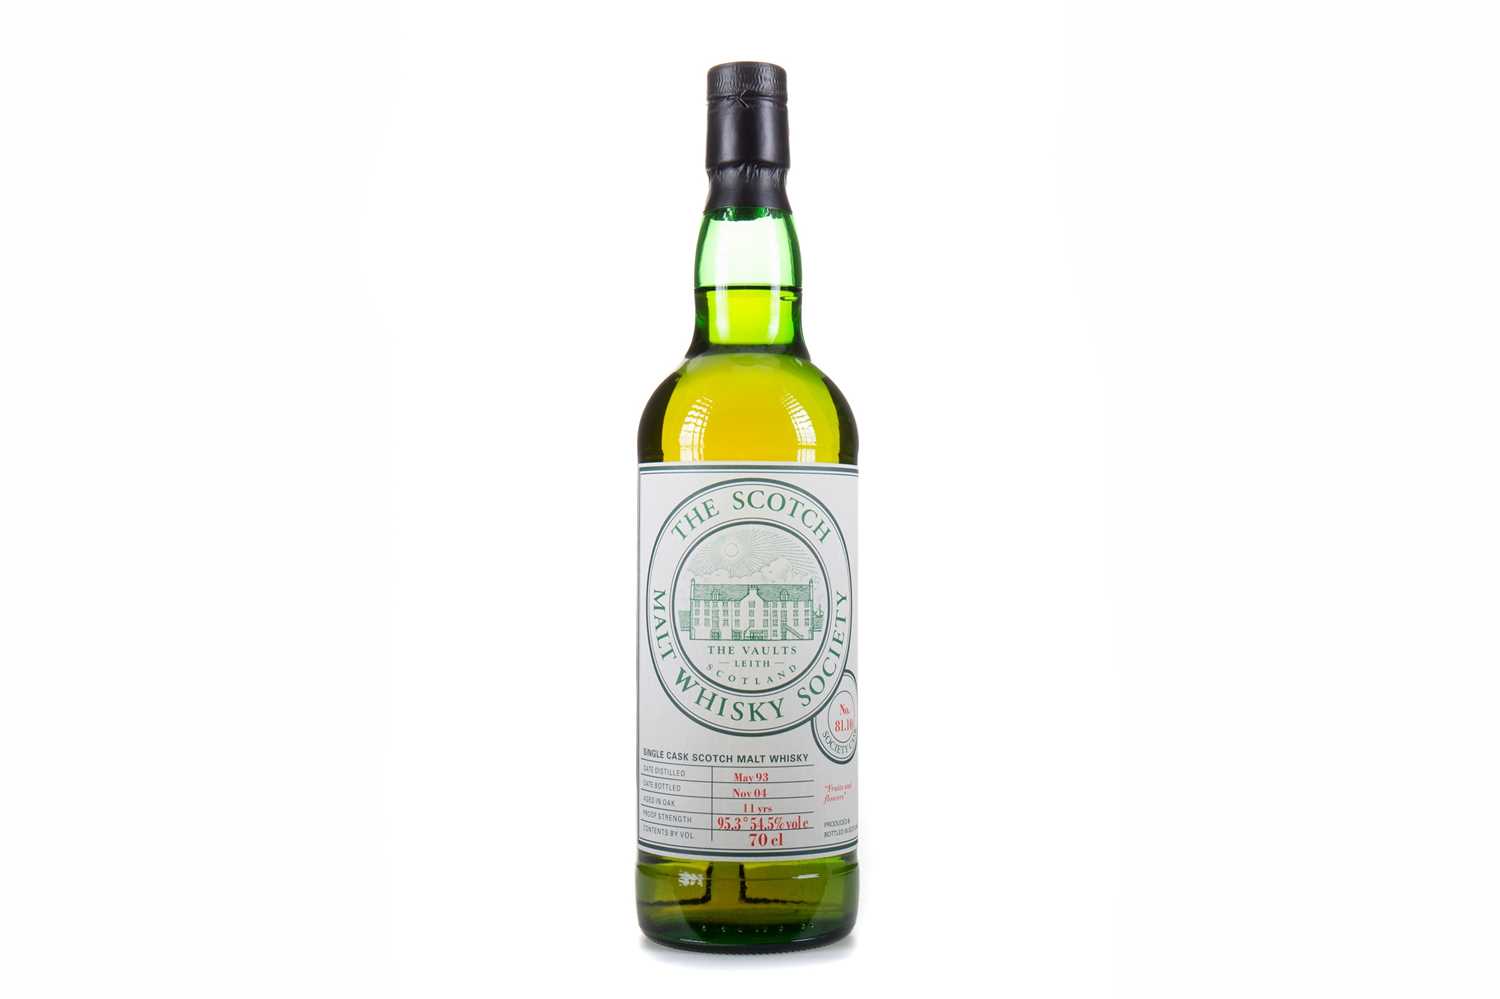 Lot 580 - SMWS 81.10 GLEN KEITH 1993 11 YEAR OLD